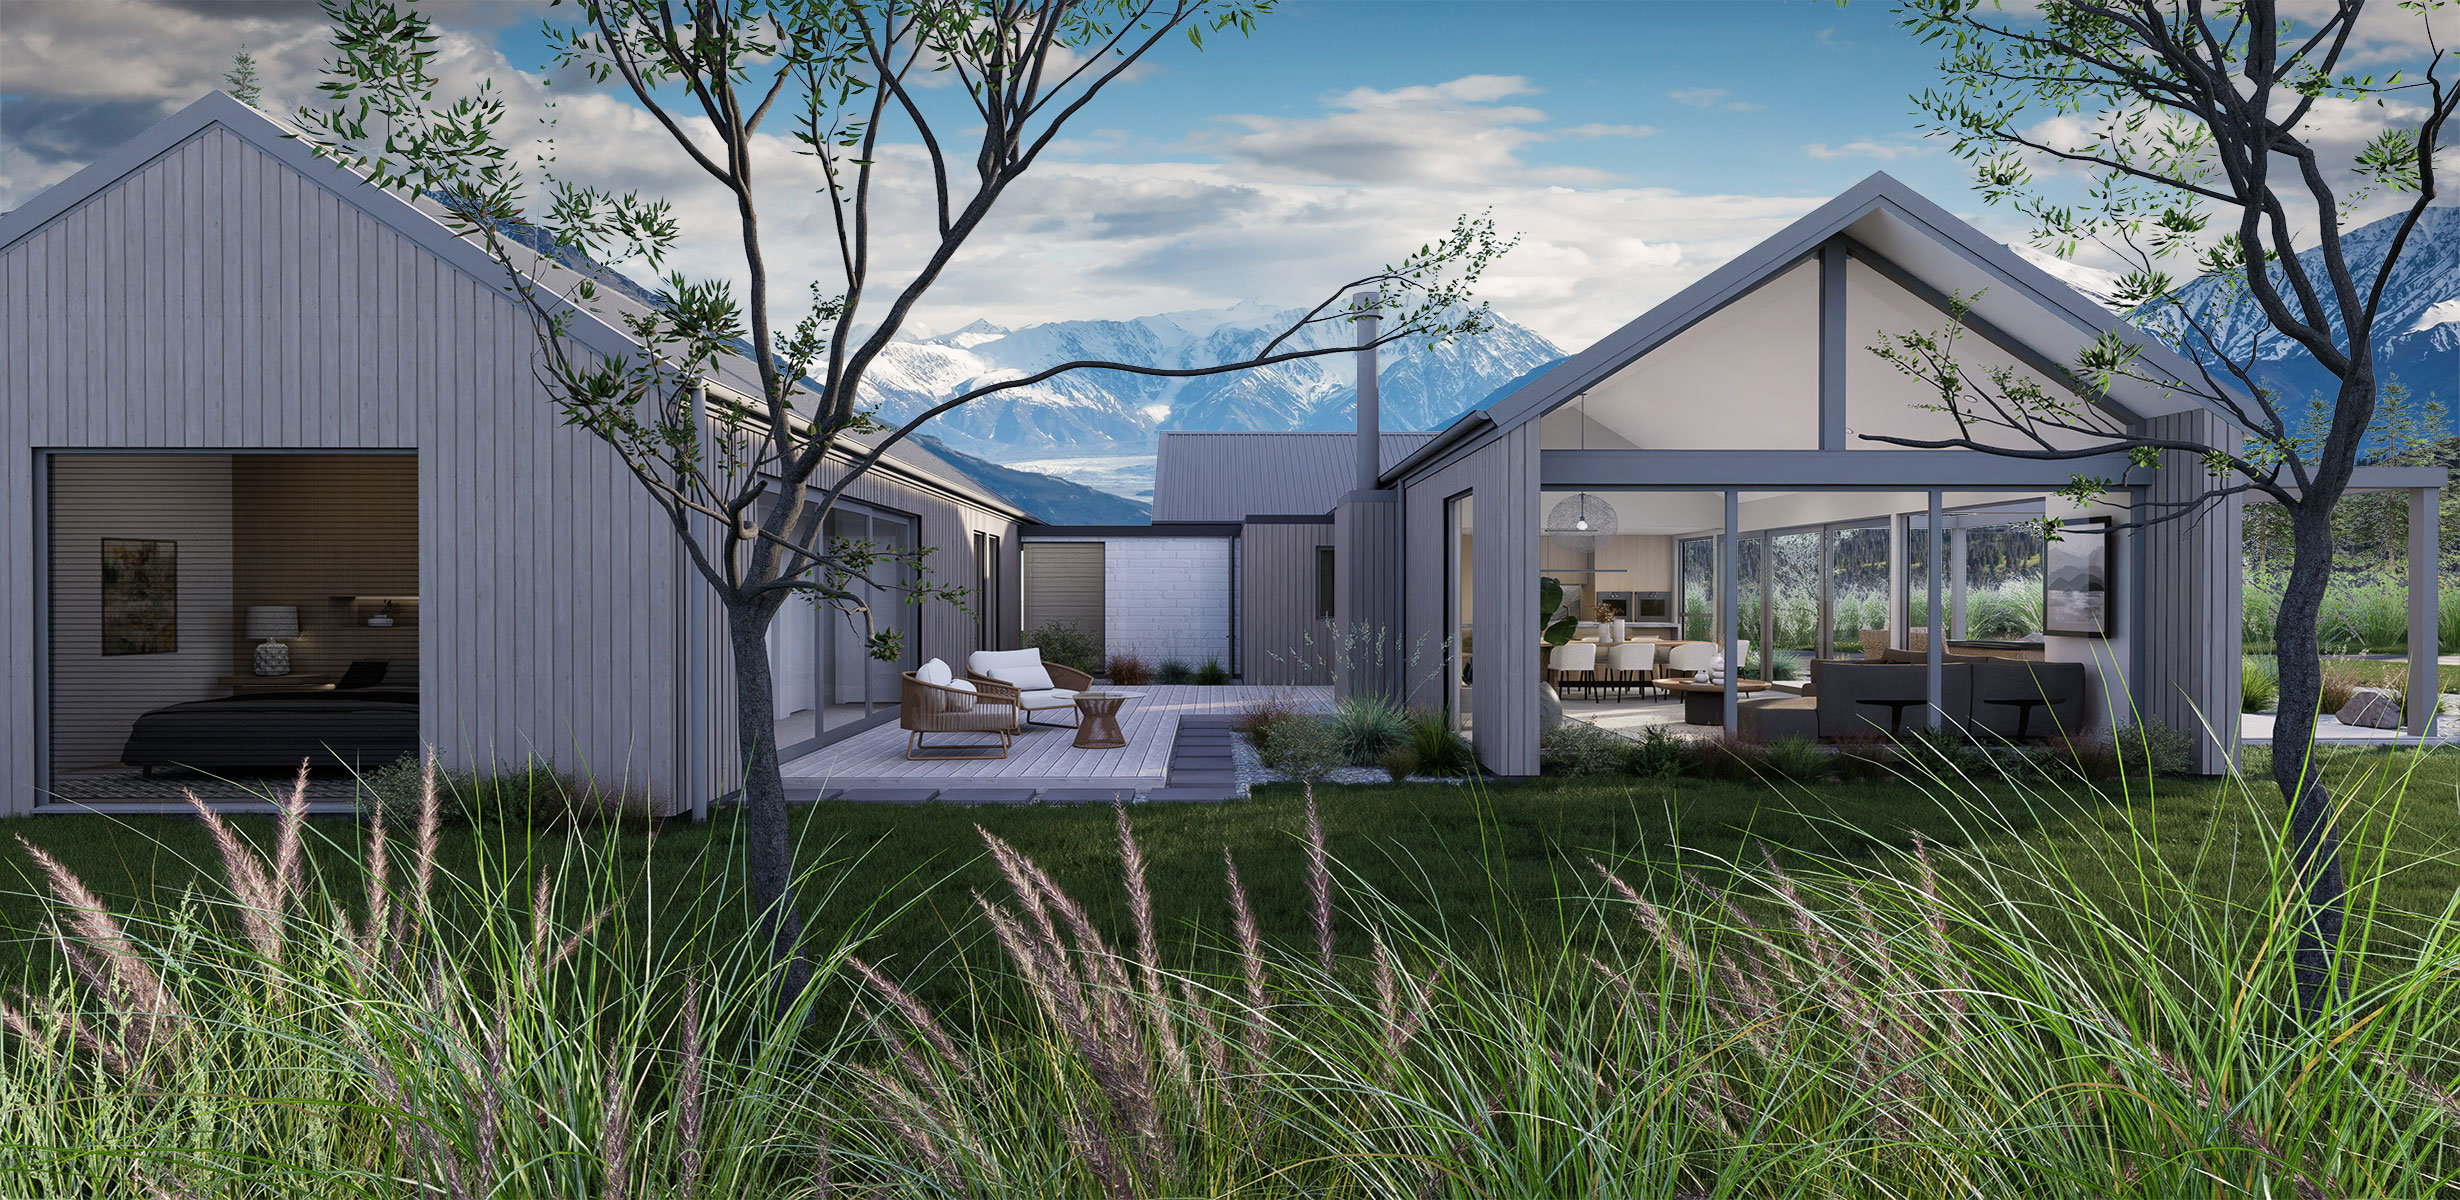 Rakaia House Plan Back View NZ - Our spacious open plan design that seamlessly connects living areas and offers stylish functionality. Enjoy ultimate convenience.